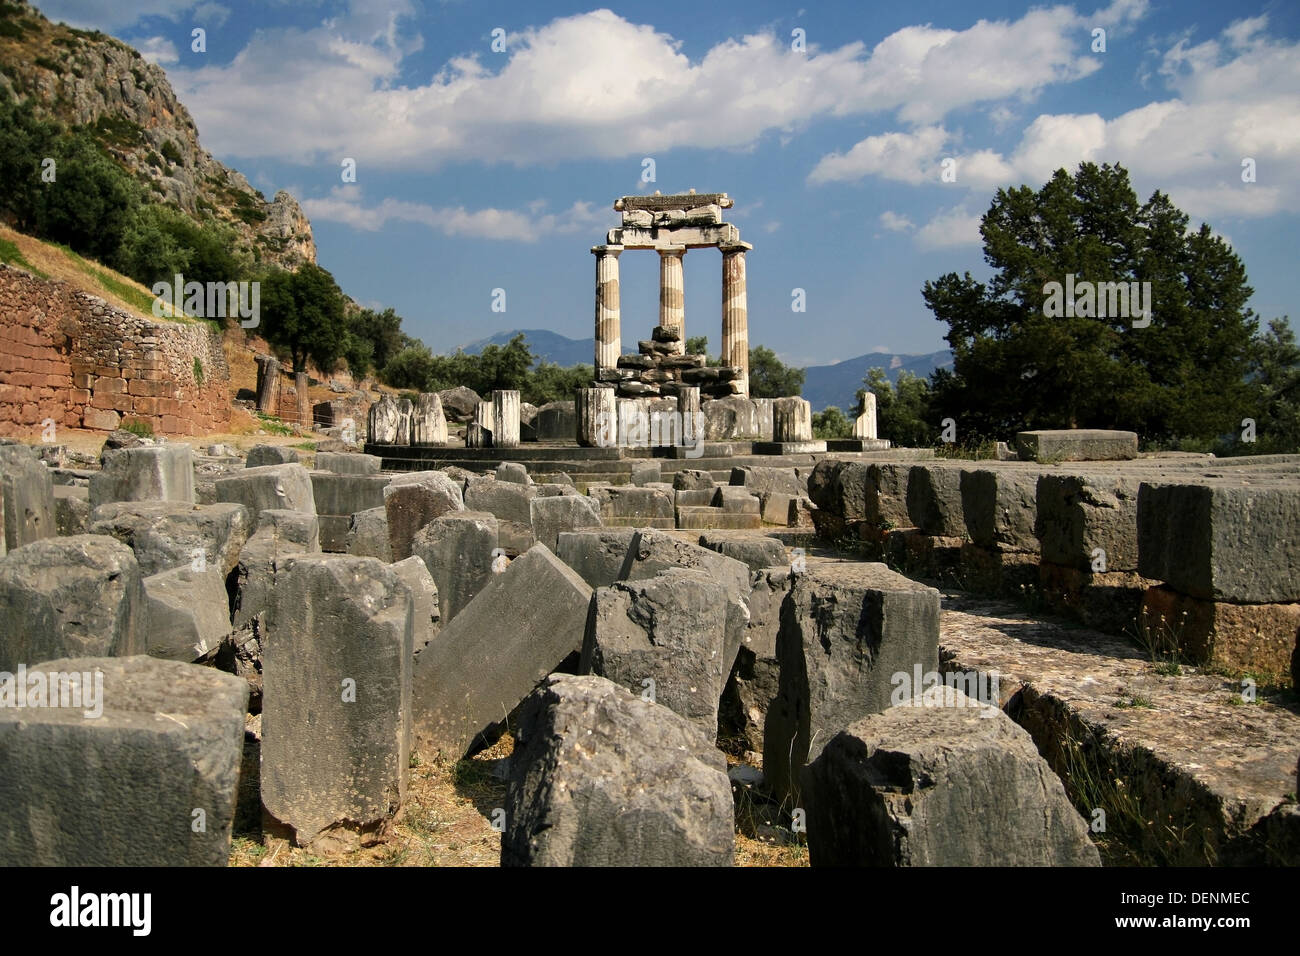 Ruins of the Tholos of Delphi, Greece. Home of the oracle. Stock Photo